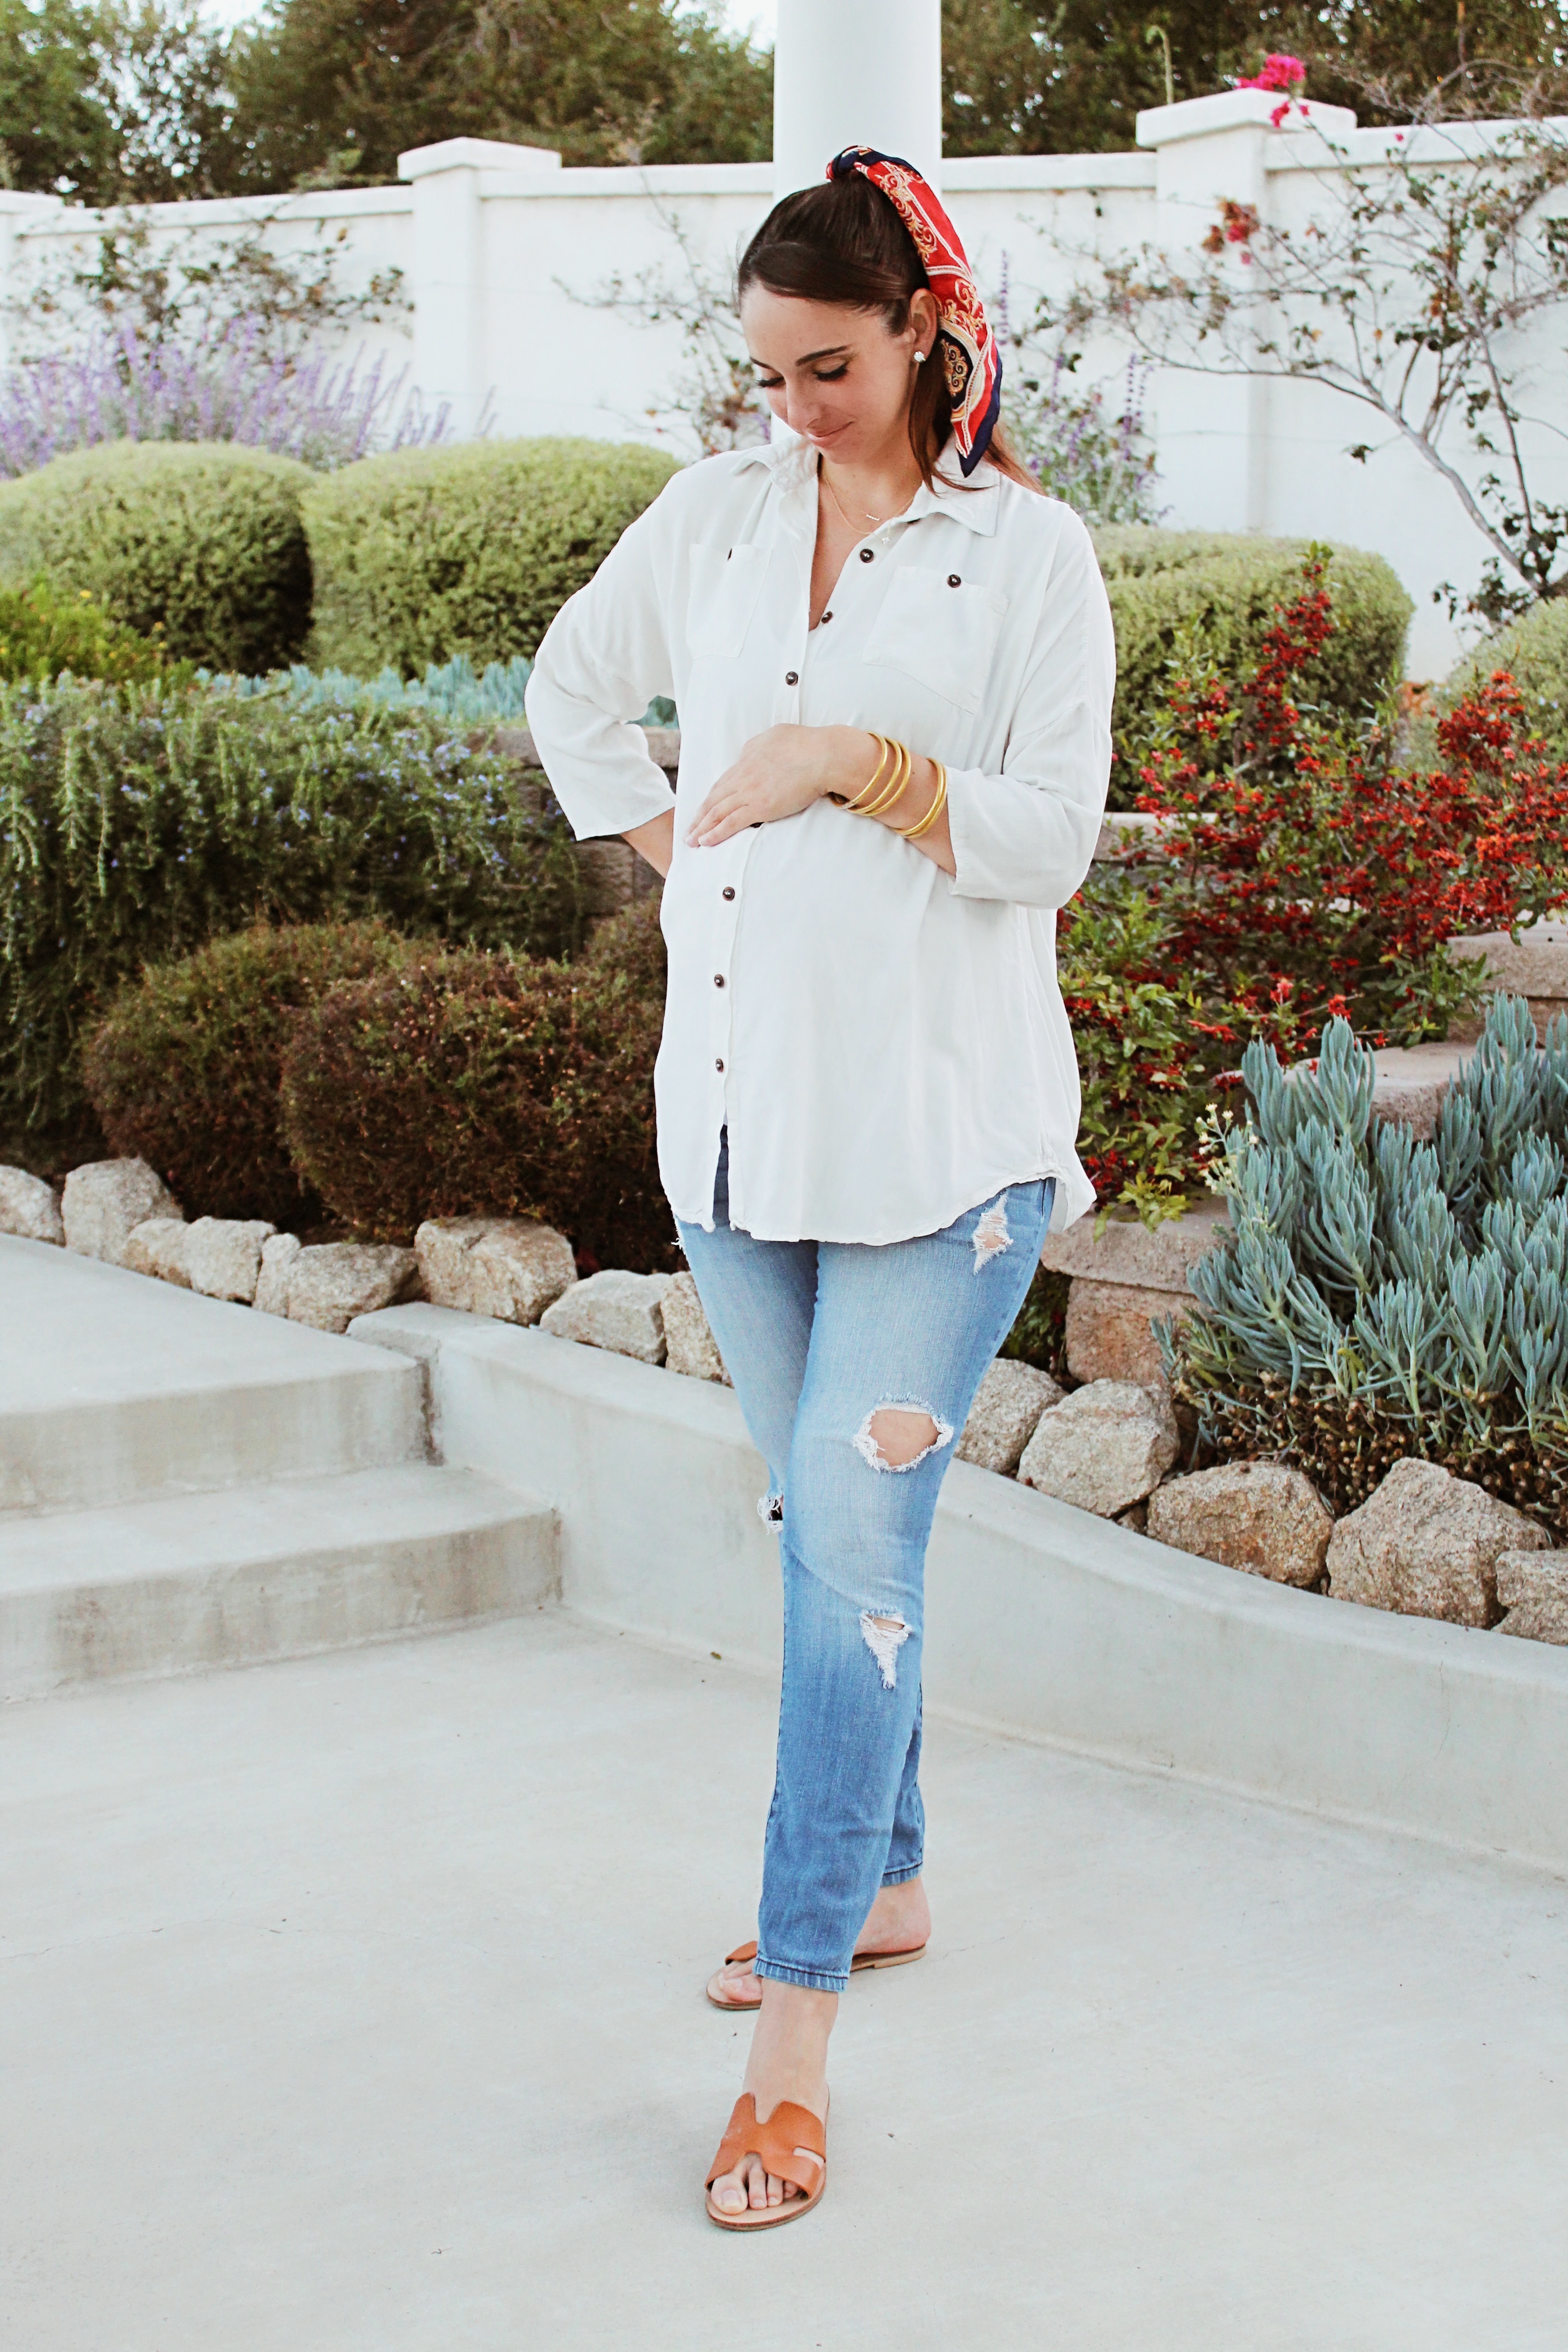 Top-Postpartum Breastfeeding Friendly 4th of July Maternity outfits long white blouse with jeans everyday maternity style street style casual